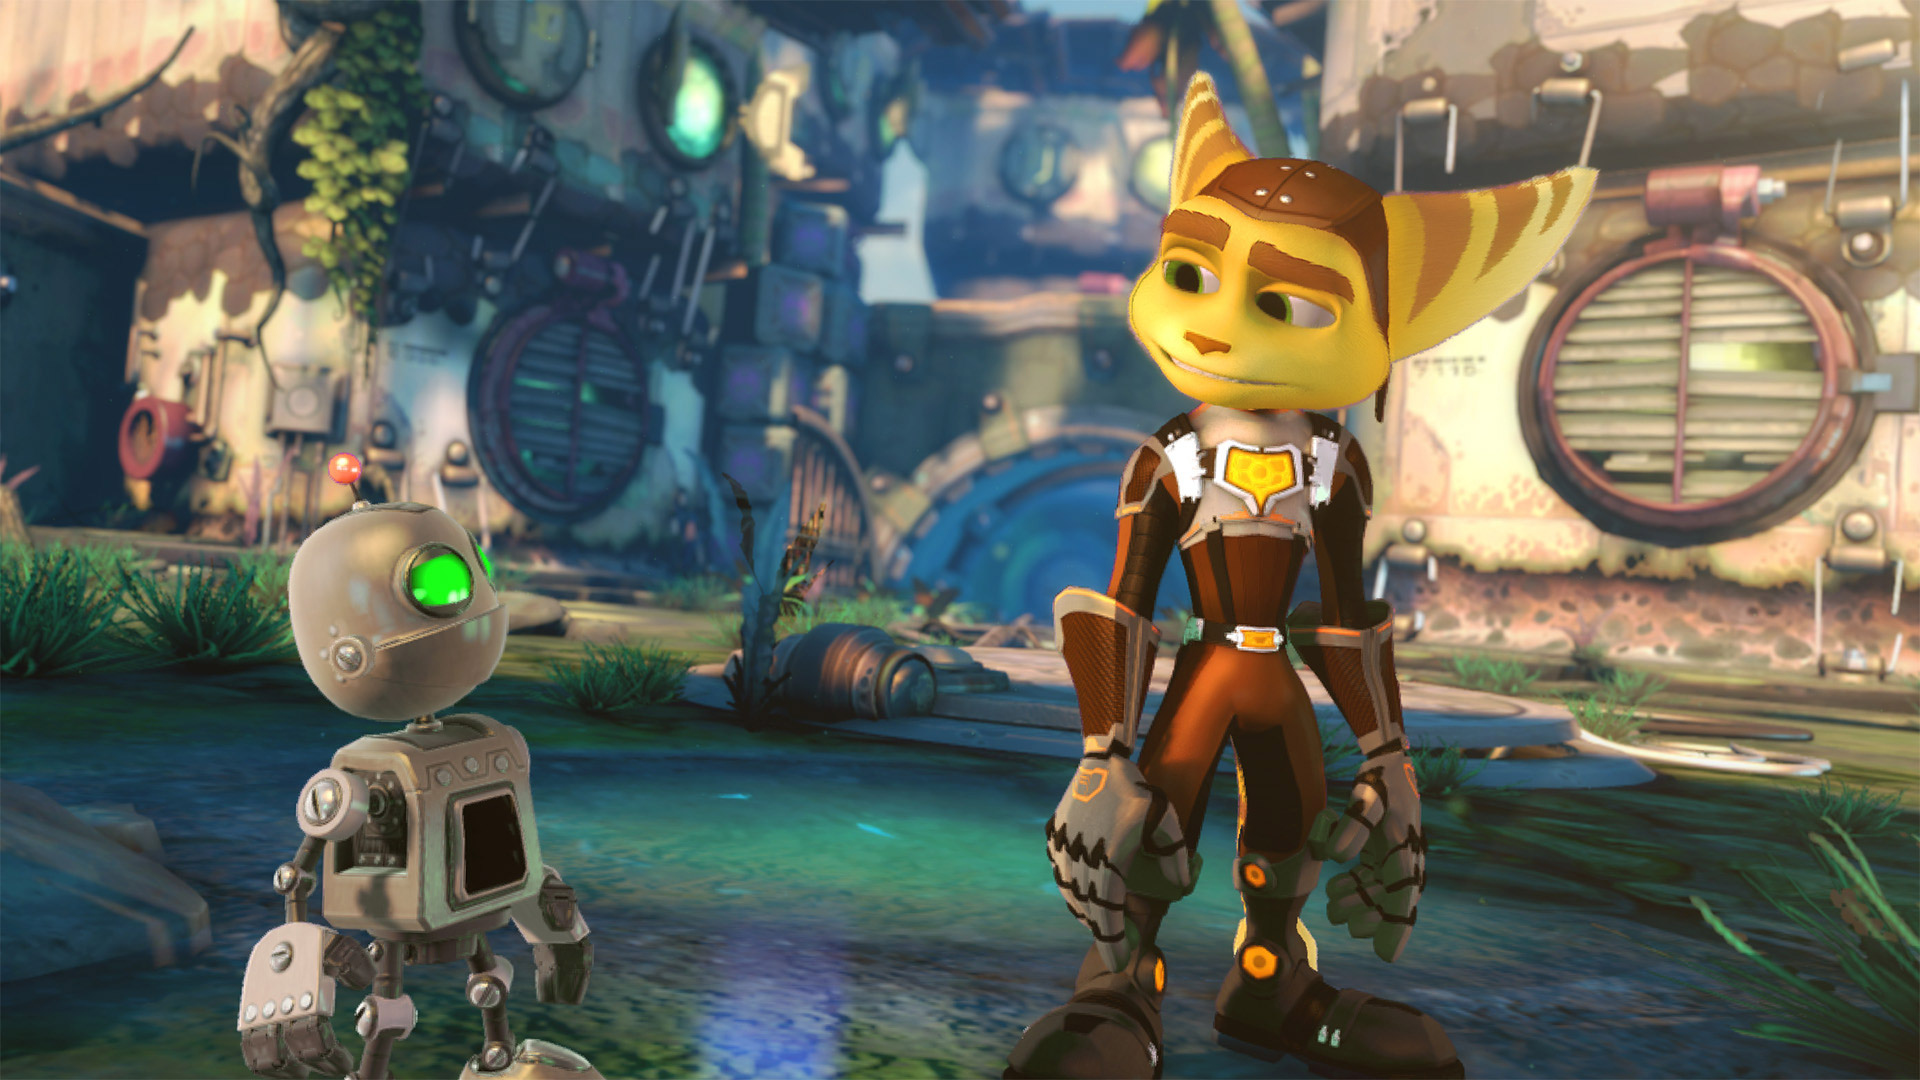 Ratchet & Clank: Into the Nexus version for PC - GamesKnit.